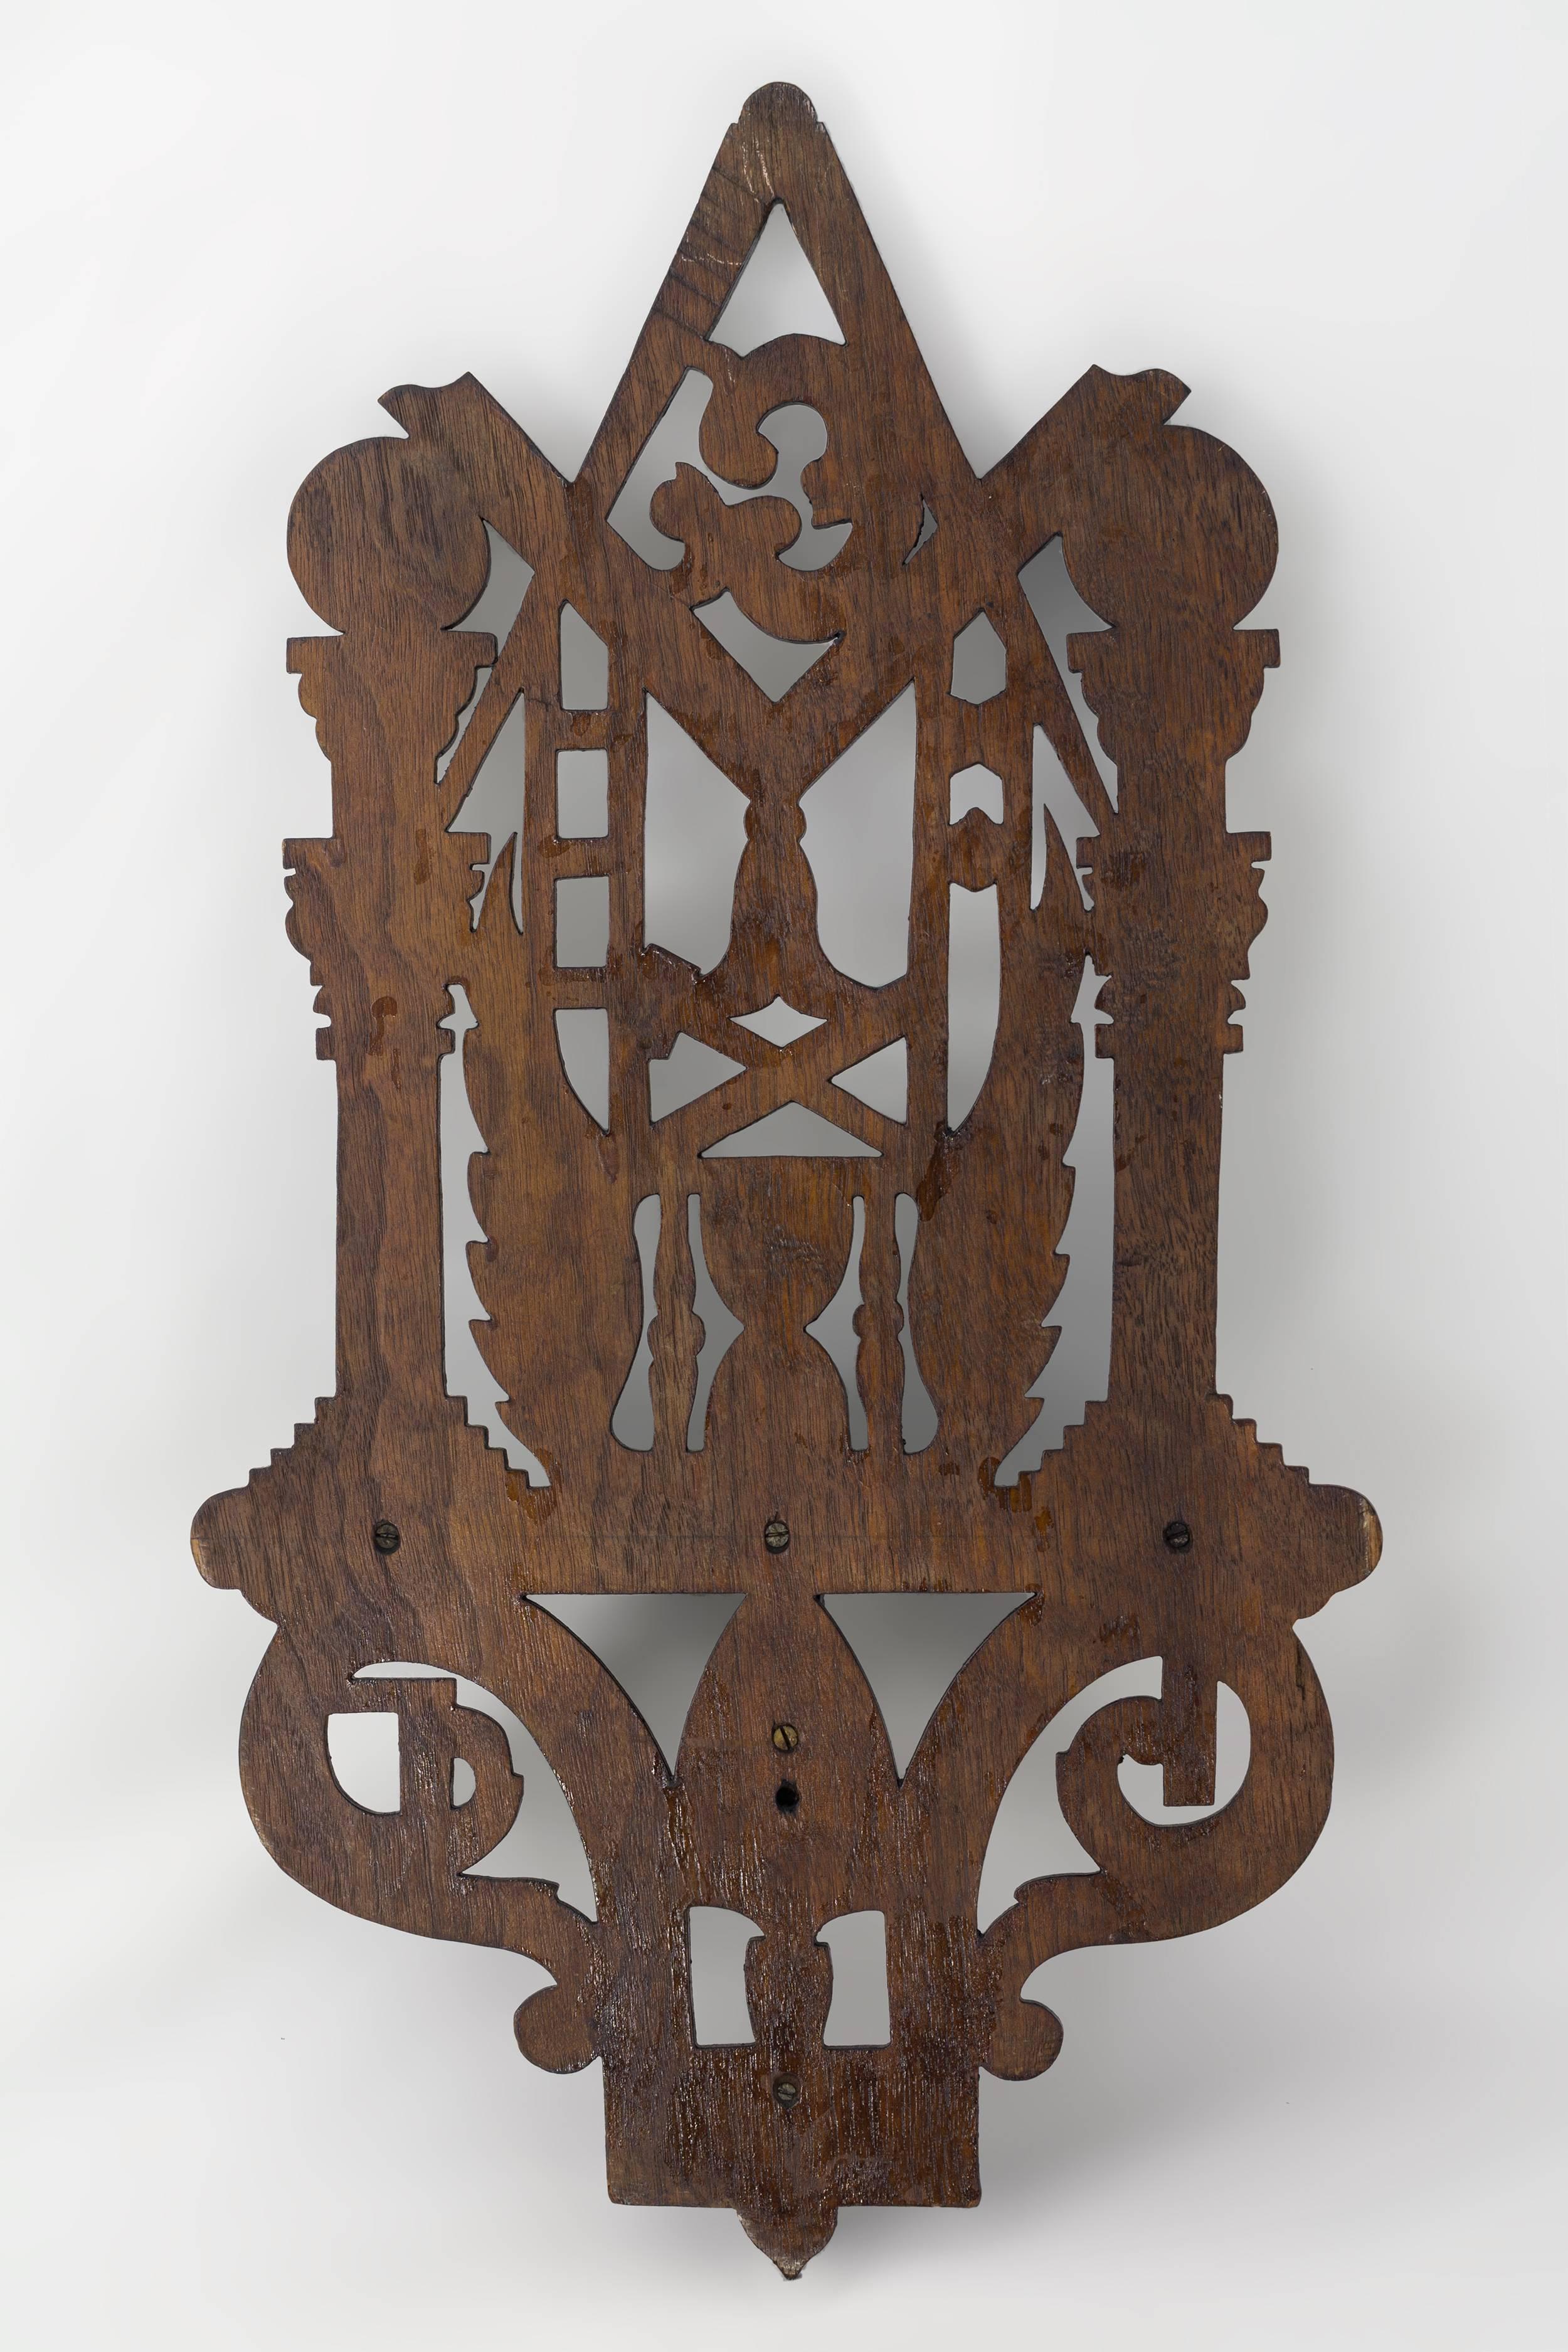 From 1866-1871 Bellamy had a workshop he rented in a Masonic Hall in Charlestown, Massachusetts. He employed a number of carvers, including his brother Elijah. They made frames, clocks and shelves, a good amount of them were personalized. This